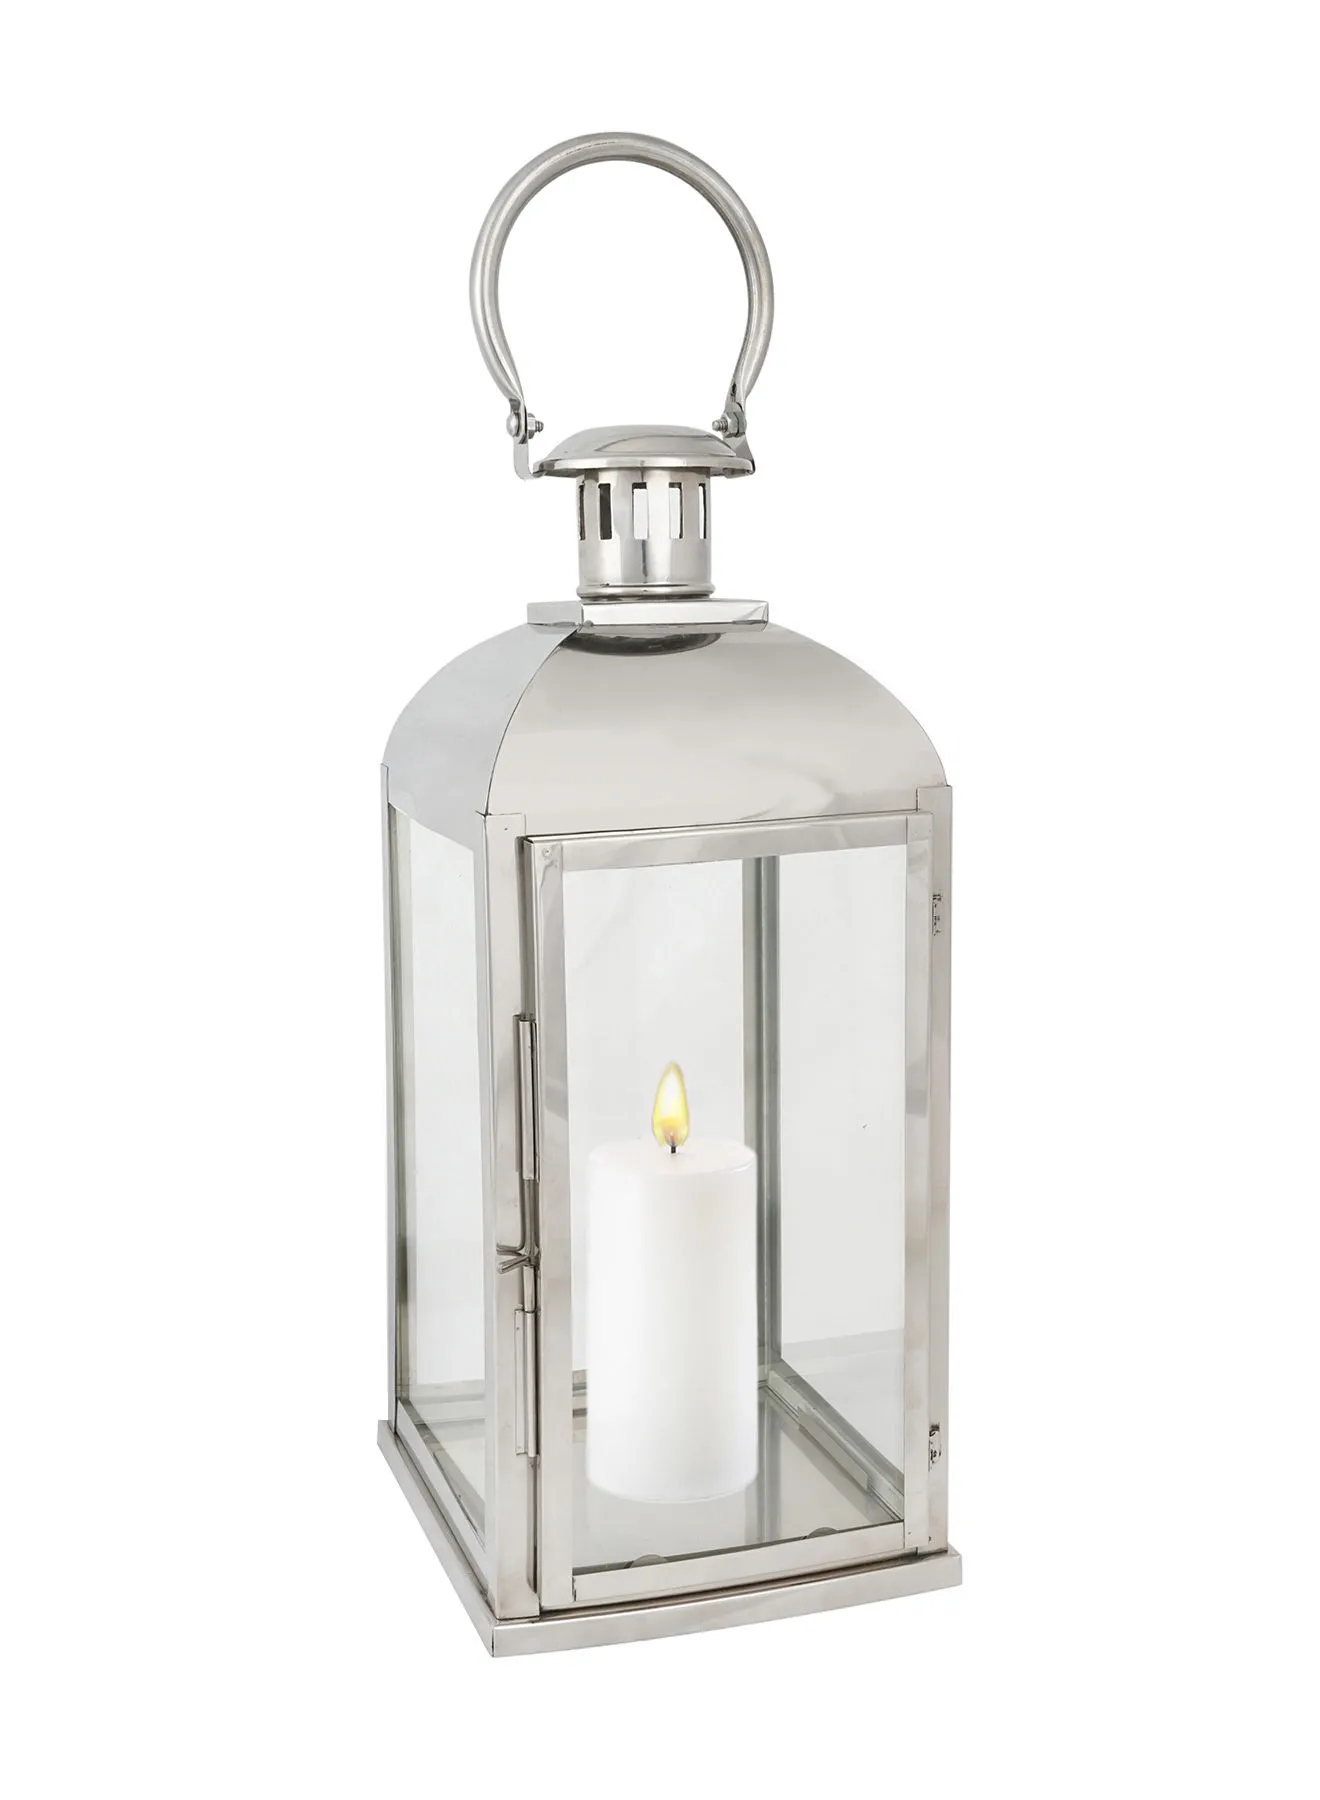 ebb & flow Modern Ramadan Lantern With Clear Glass Unique Luxury Quality Scents For The Perfect Stylish Home Silver 12 x 12 x 27centimeter